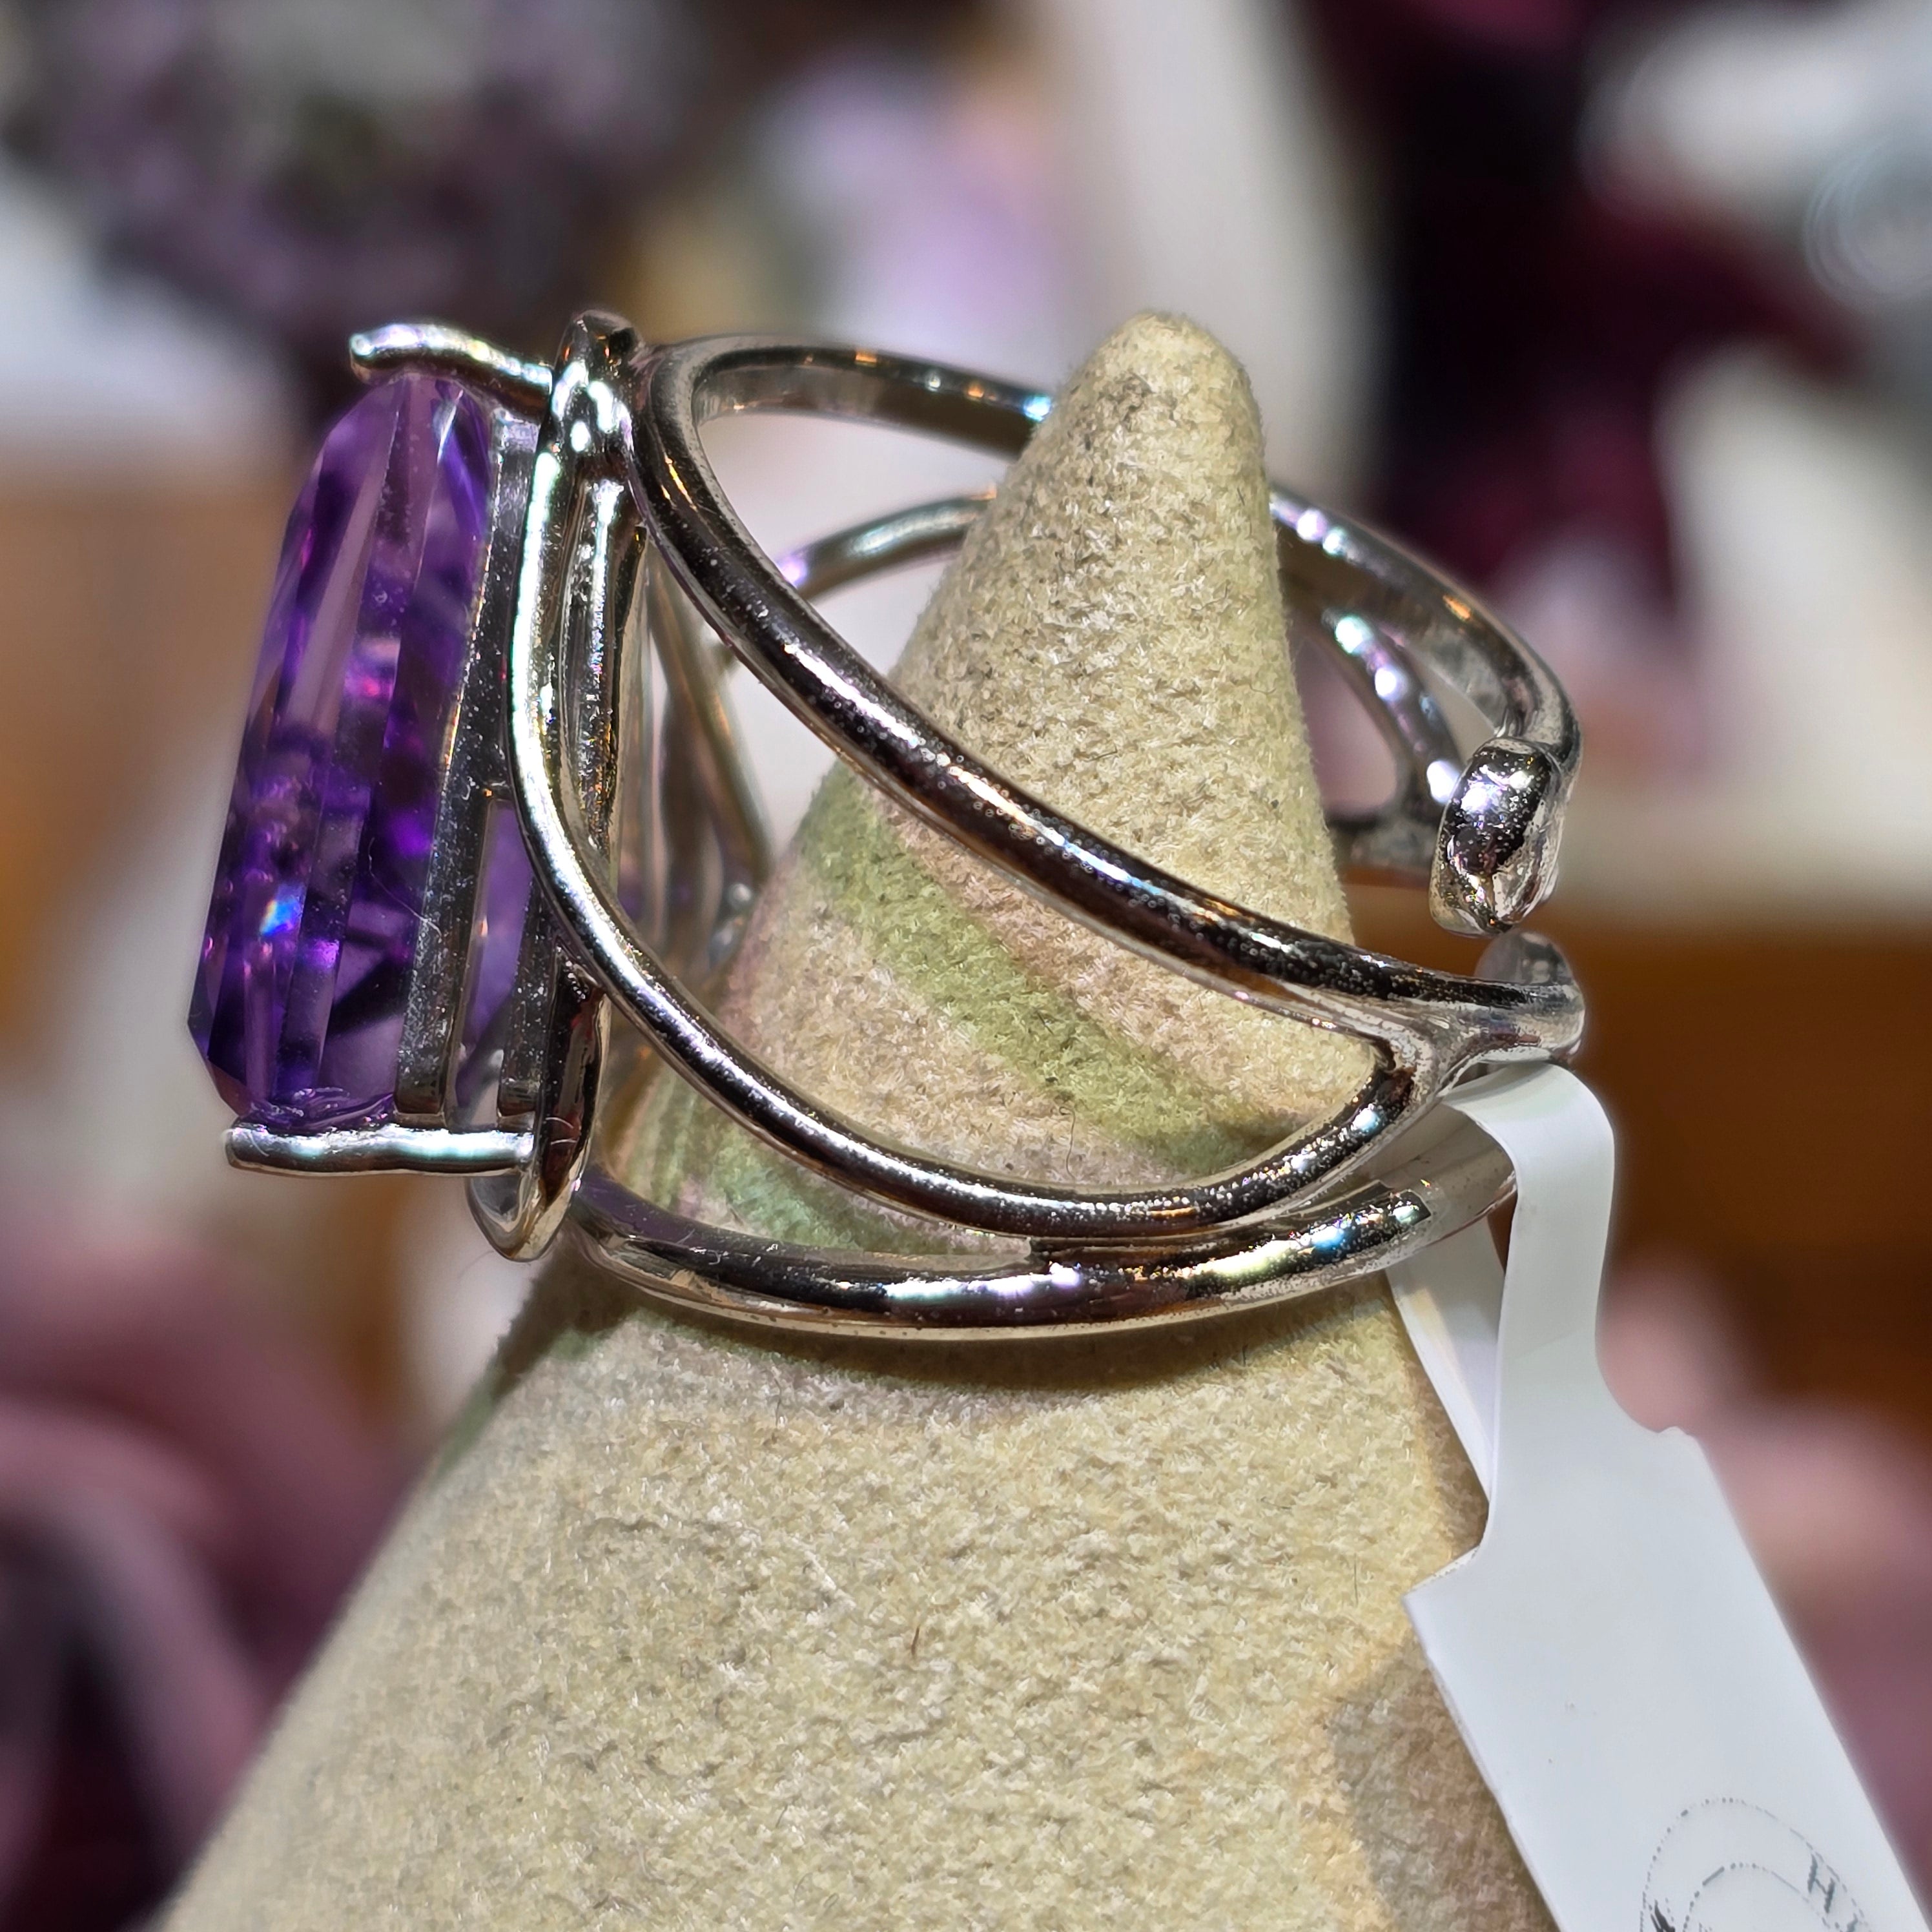 Amethyst Ganesha Finger Cuff Adjustable Ring .925 Silver for Divine Connection and Clearing Blockages